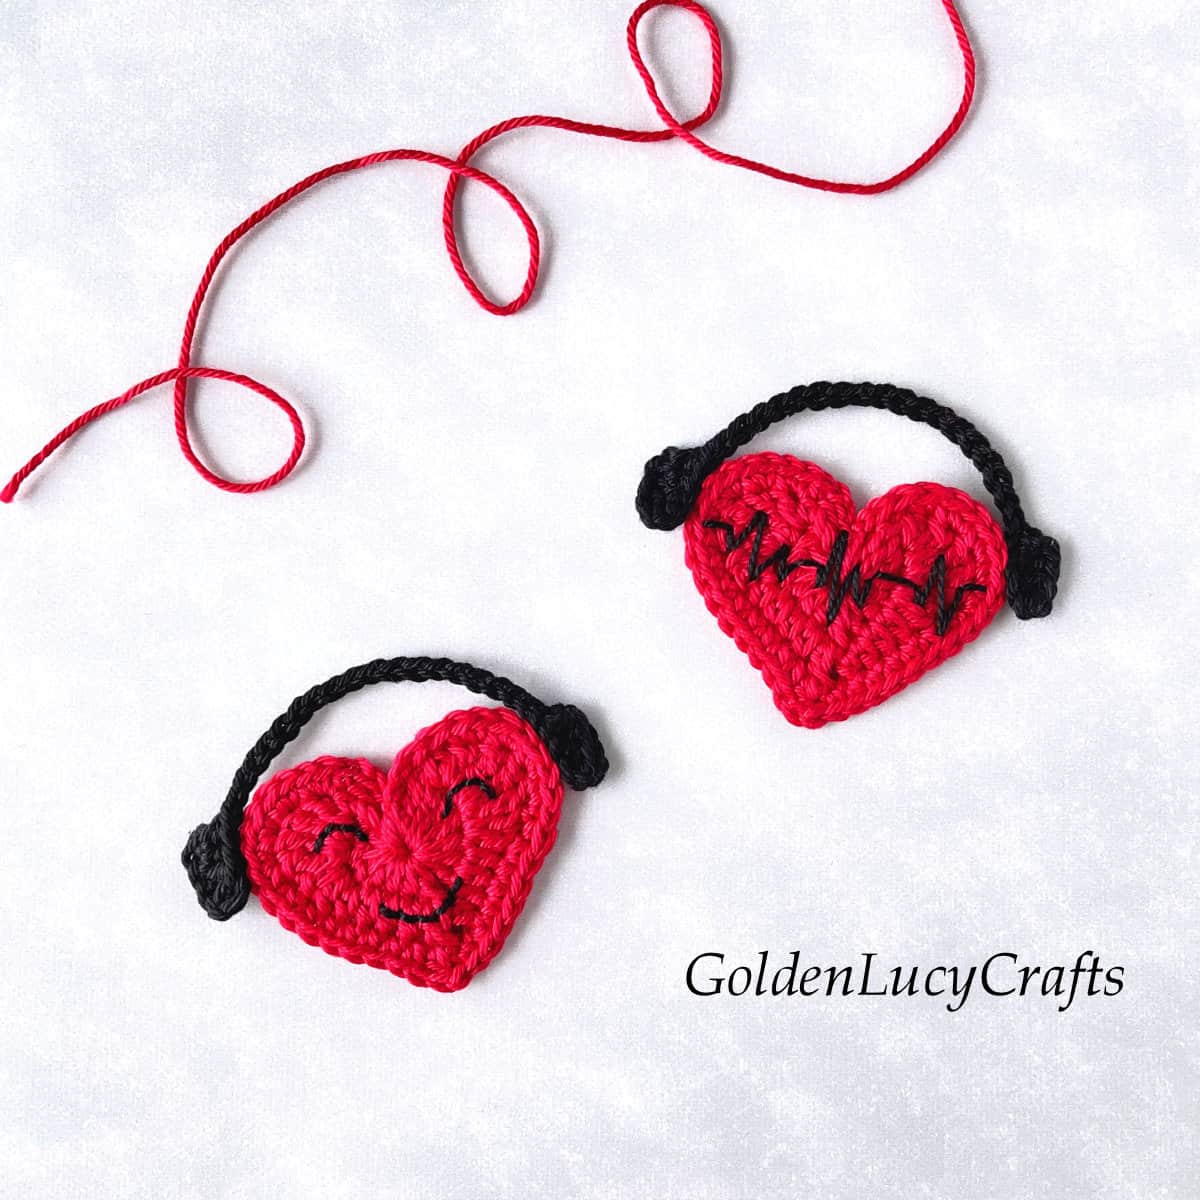 Crochet appliques two red hearts with headphones.